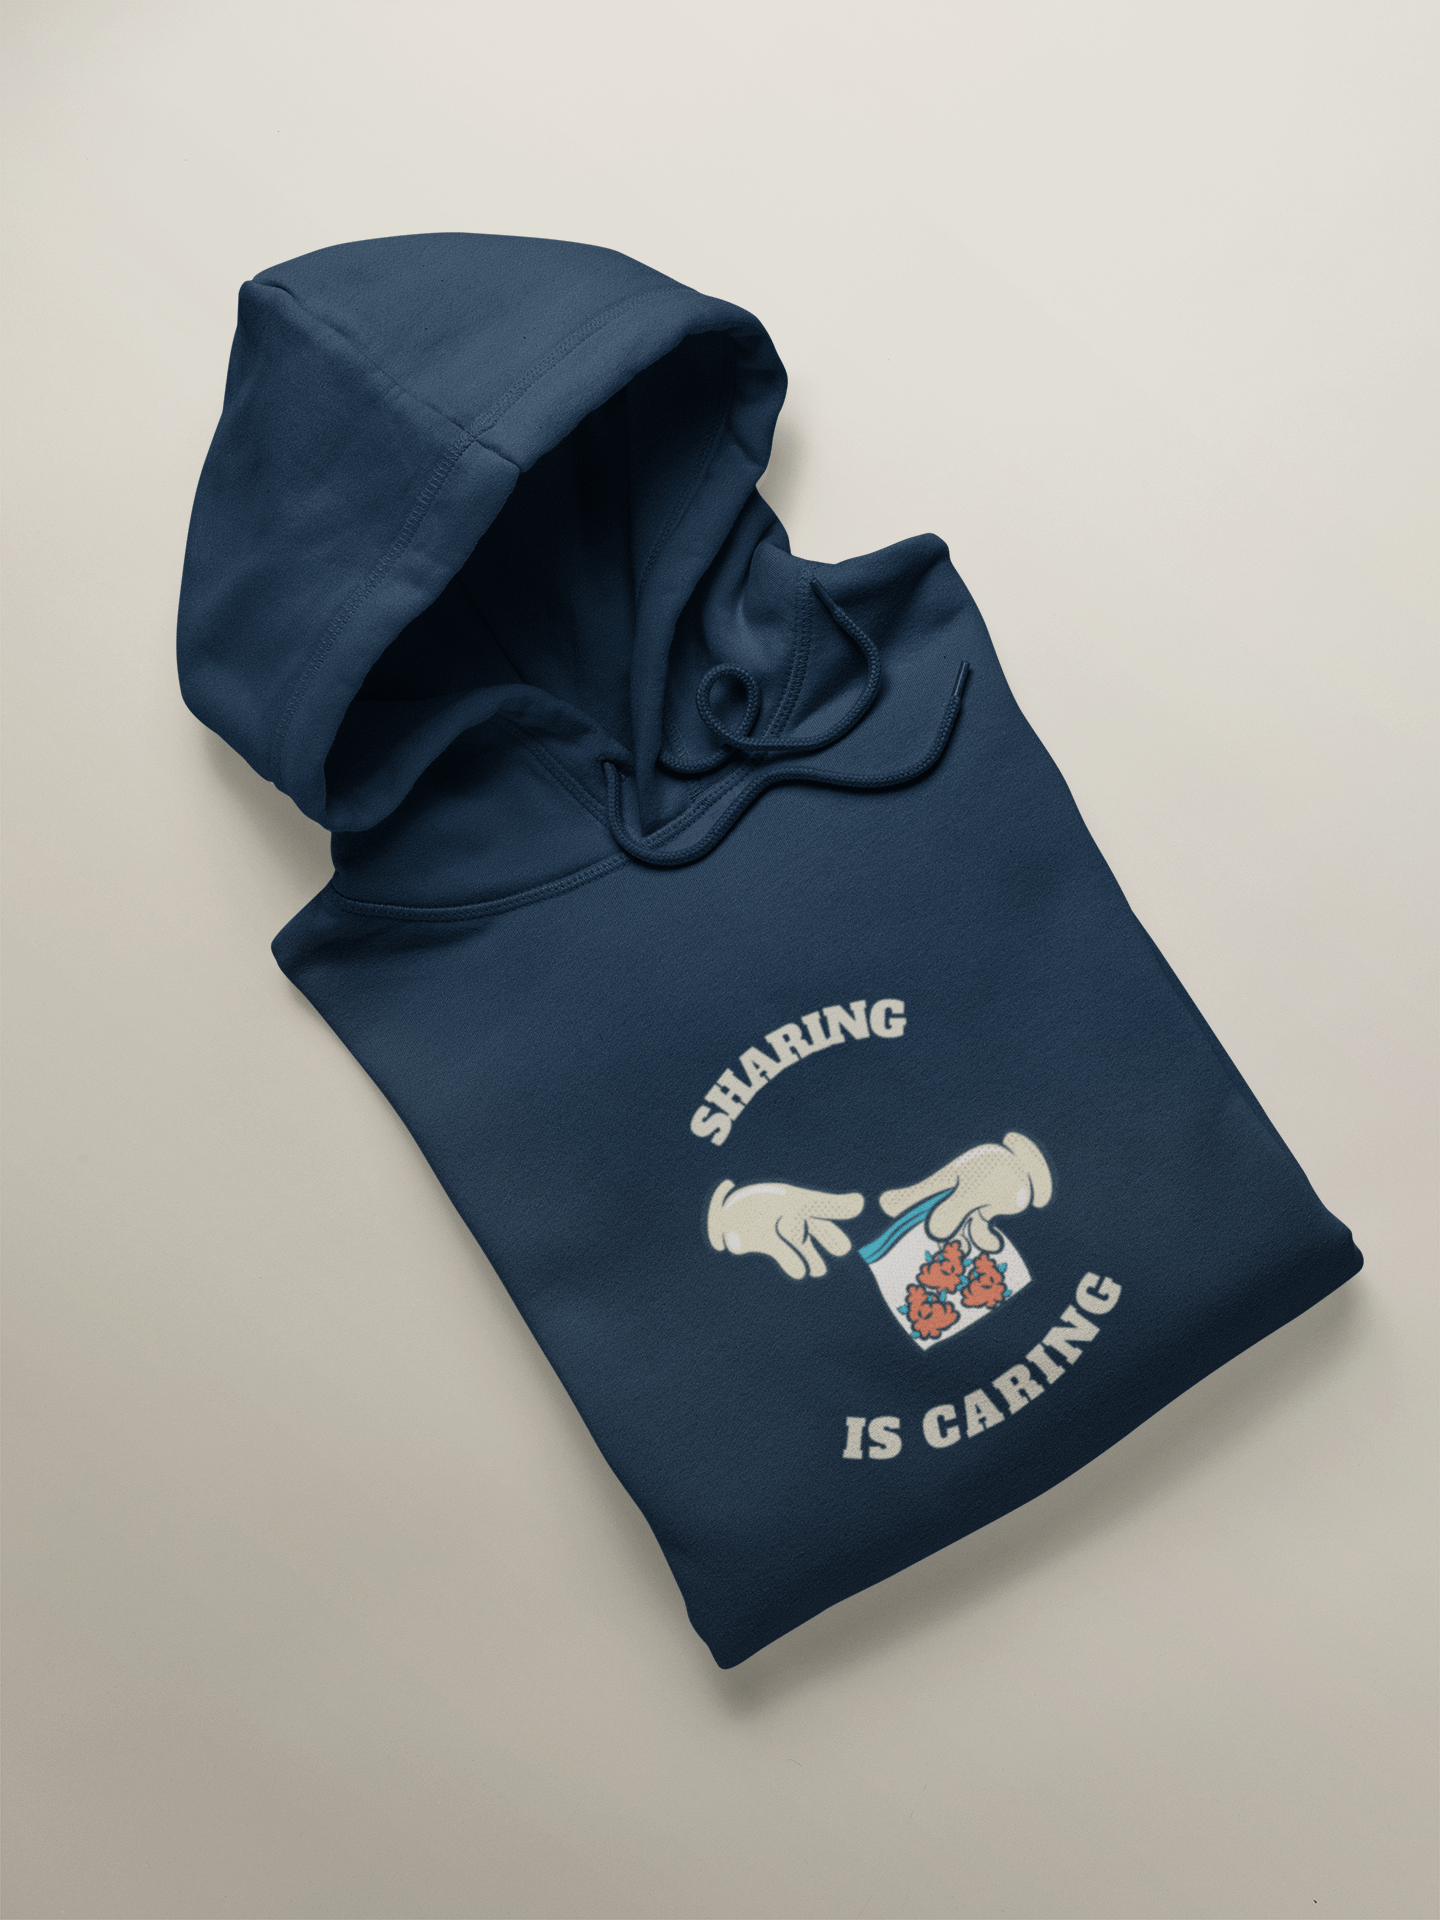 SHARING IS CARING- WINTER HOODIES